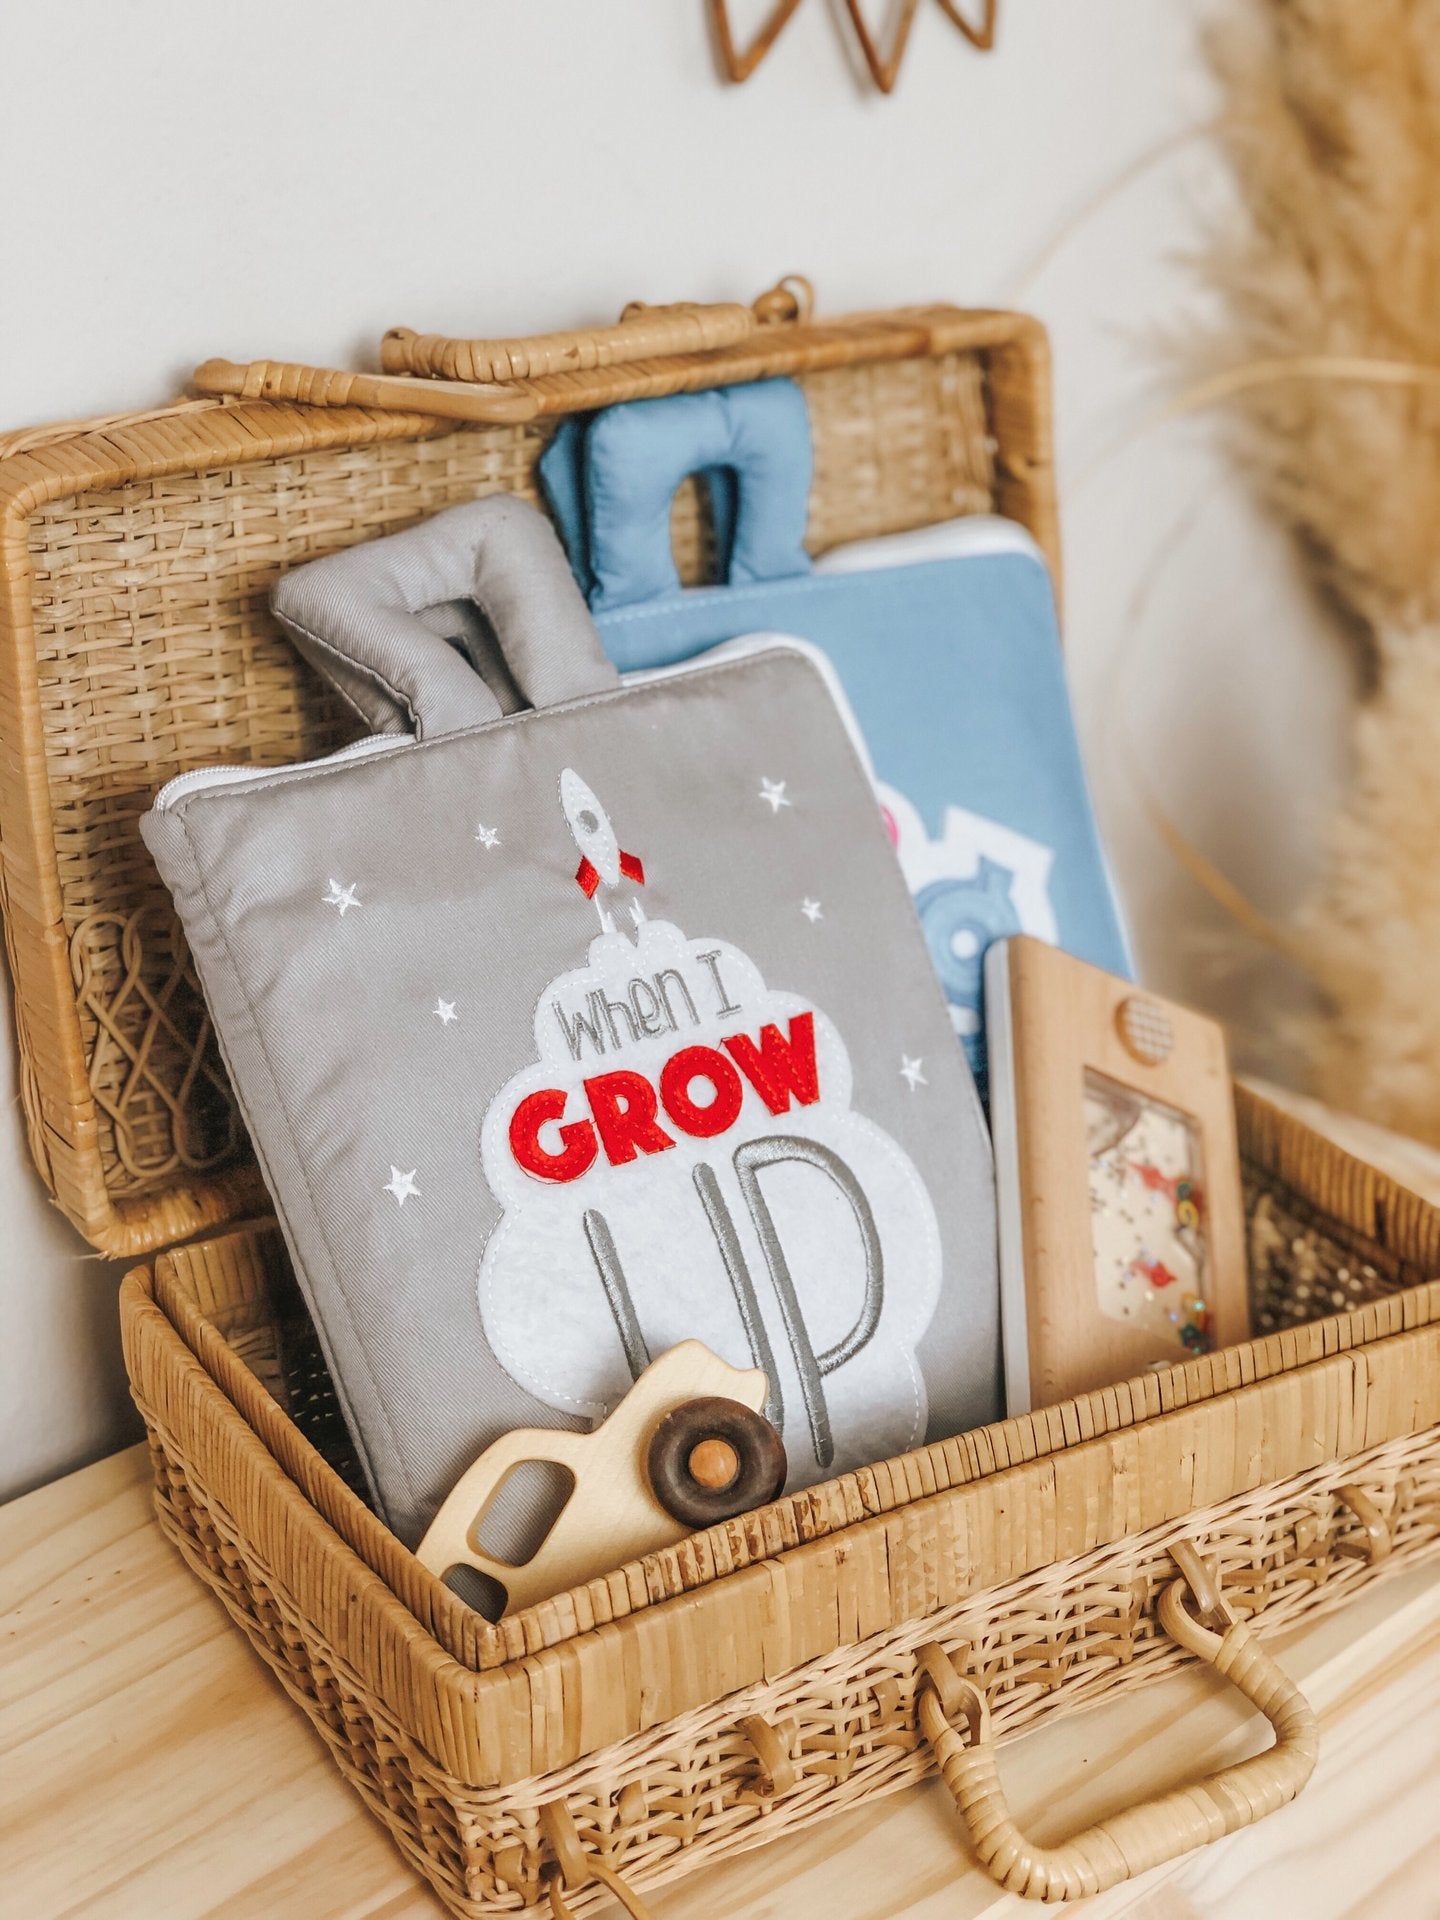 
                  
                    Fabric Quiet Activity Book - When I Grow Up
                  
                